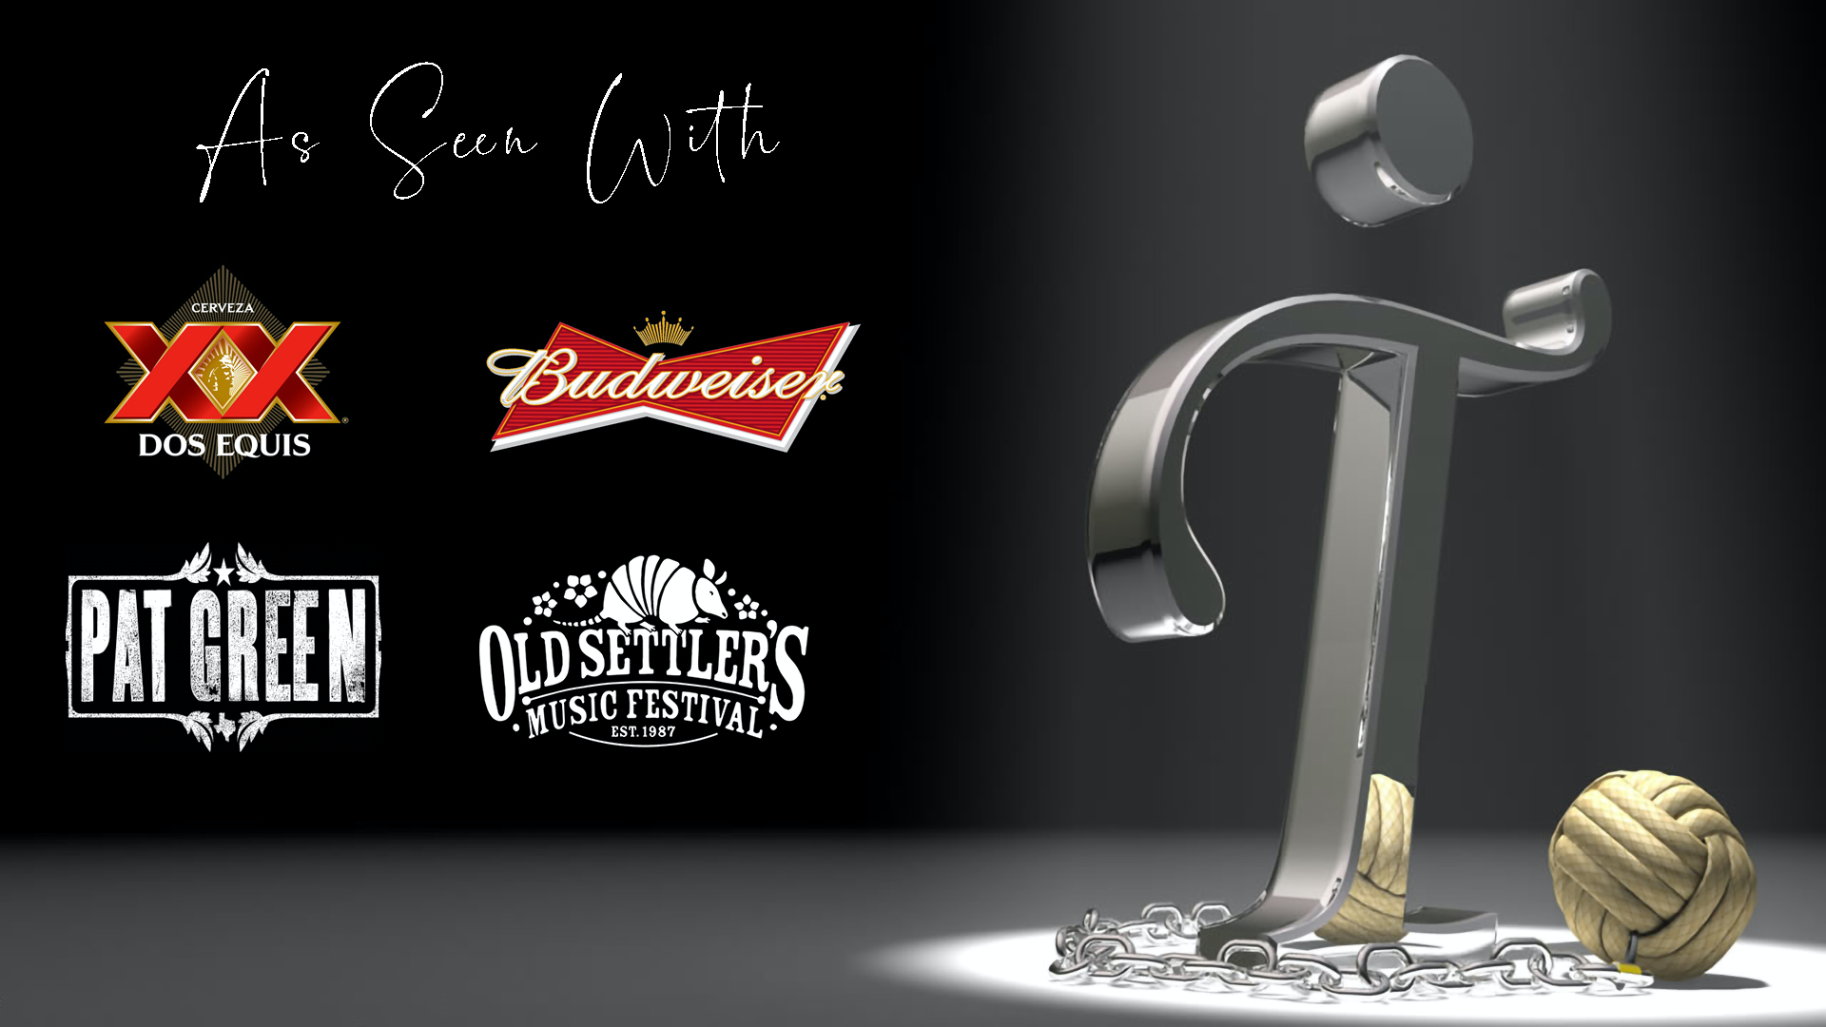 A spotlit 3d metal logo saying As Seen with: Dos Equis, Budweiser, Pat Green, Old Settlers Music Festival